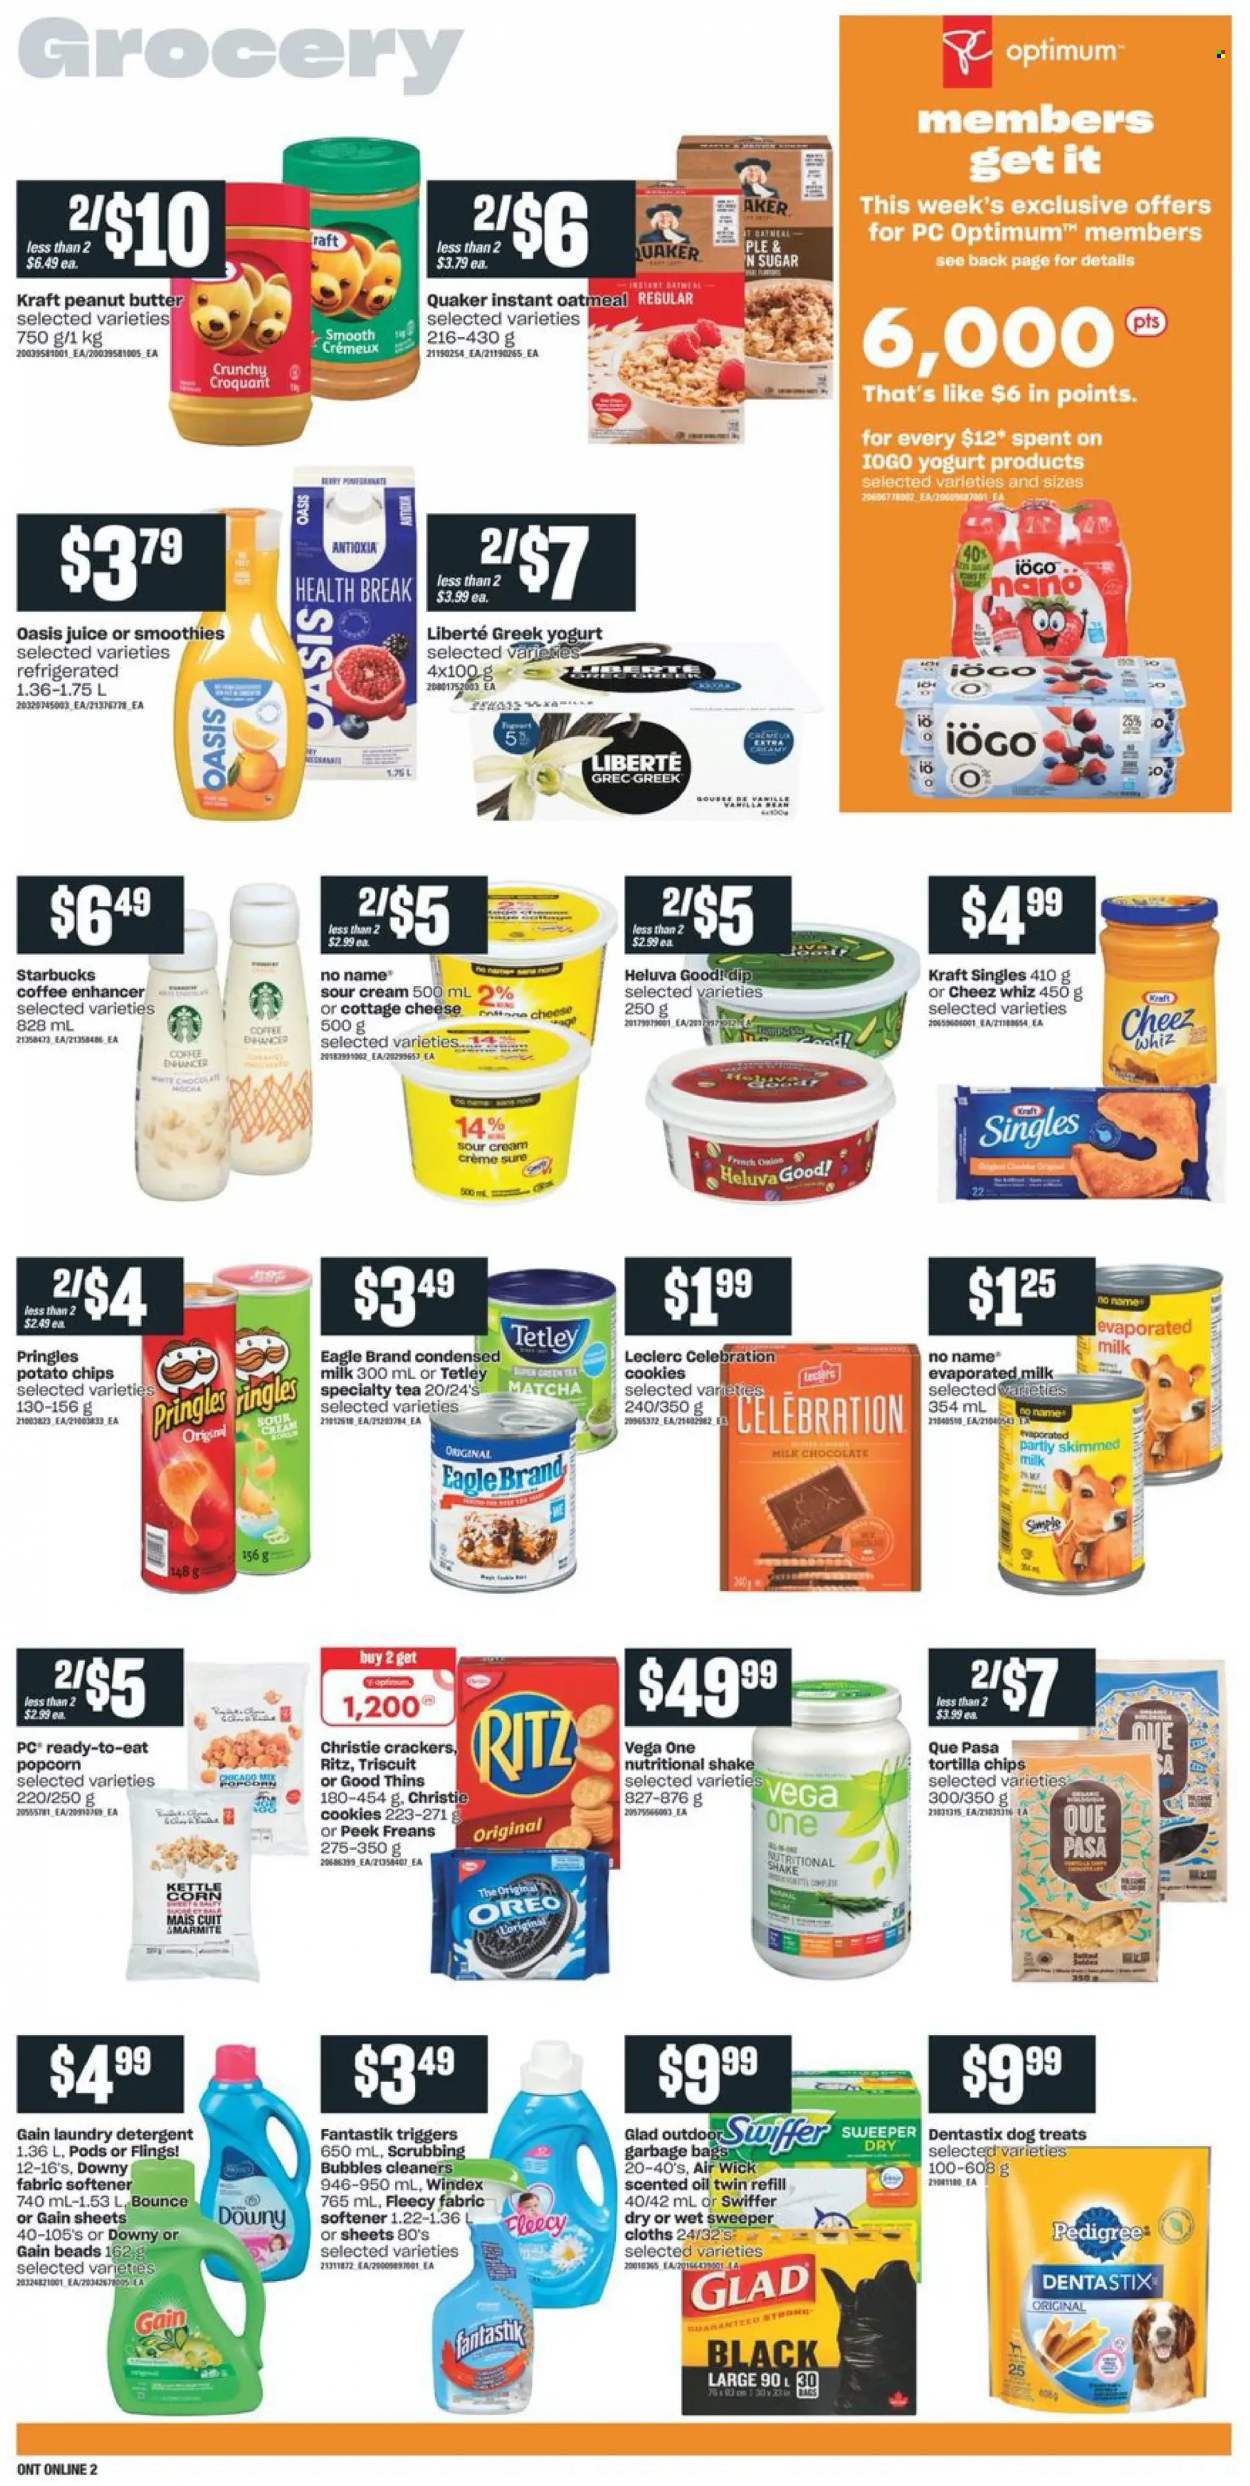 thumbnail - Independent Flyer - September 30, 2021 - October 06, 2021 - Sales products - No Name, Quaker, Kraft®, cottage cheese, sandwich slices, cheese, Kraft Singles, greek yoghurt, yoghurt, evaporated milk, condensed milk, shake, sour cream, dip, cookies, milk chocolate, chocolate, Celebration, crackers, RITZ, tortilla chips, kettle corn, potato chips, Pringles, Thins, sugar, oatmeal, oil, peanut butter, juice, matcha, tea, coffee, Starbucks, Gain, Windex, Scrubbing Bubbles, Swiffer, fabric softener, laundry detergent, Downy Laundry, Sure, bag, Air Wick, scented oil, Dentastix, Optimum, Pedigree, Oreo, detergent, chips. Page 8.